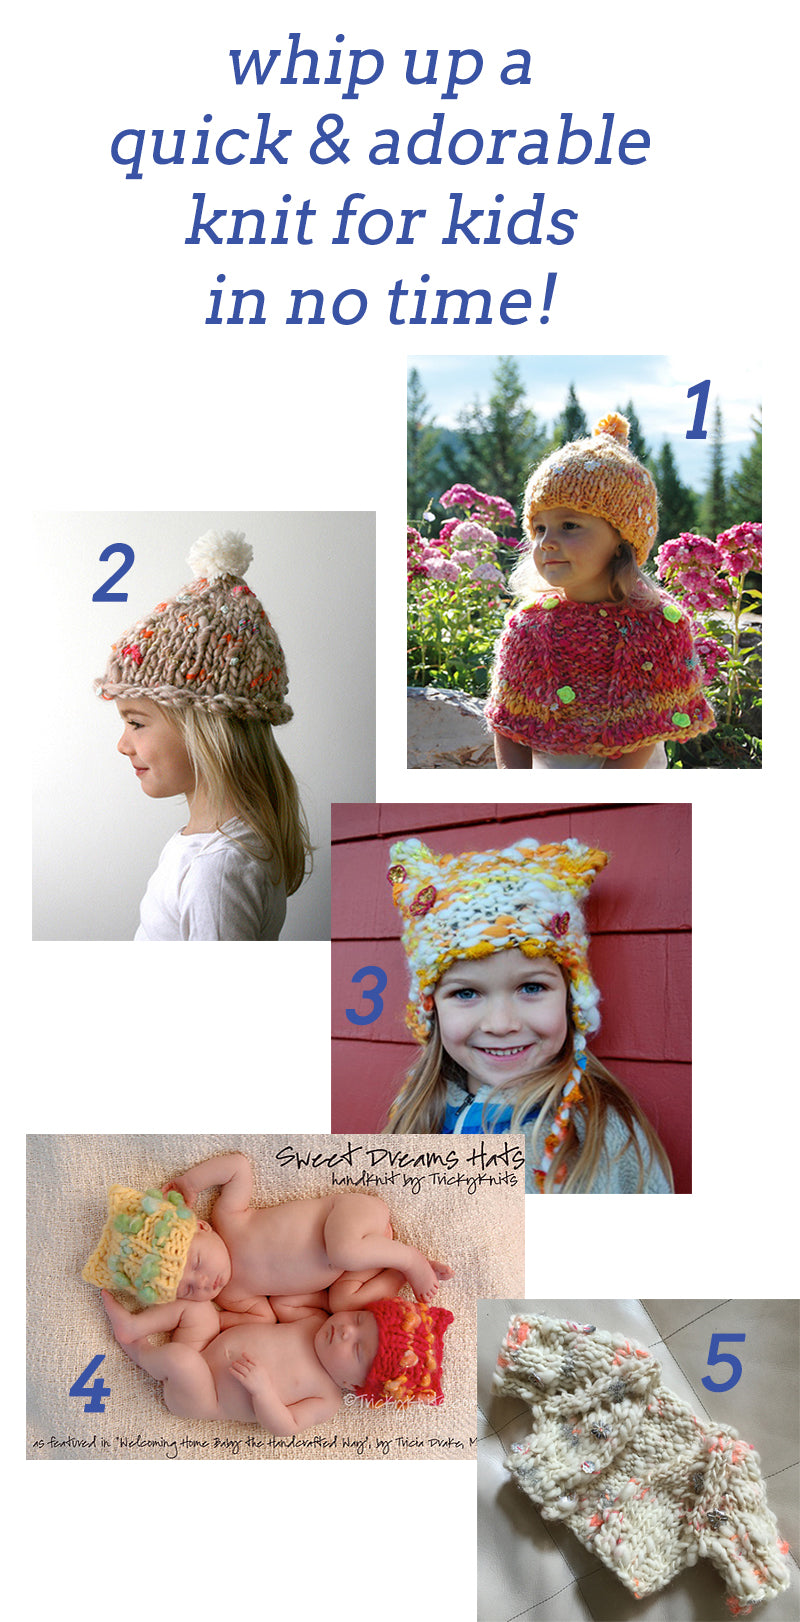 Knit Collage Quick Knit Ideas and Projects for kids